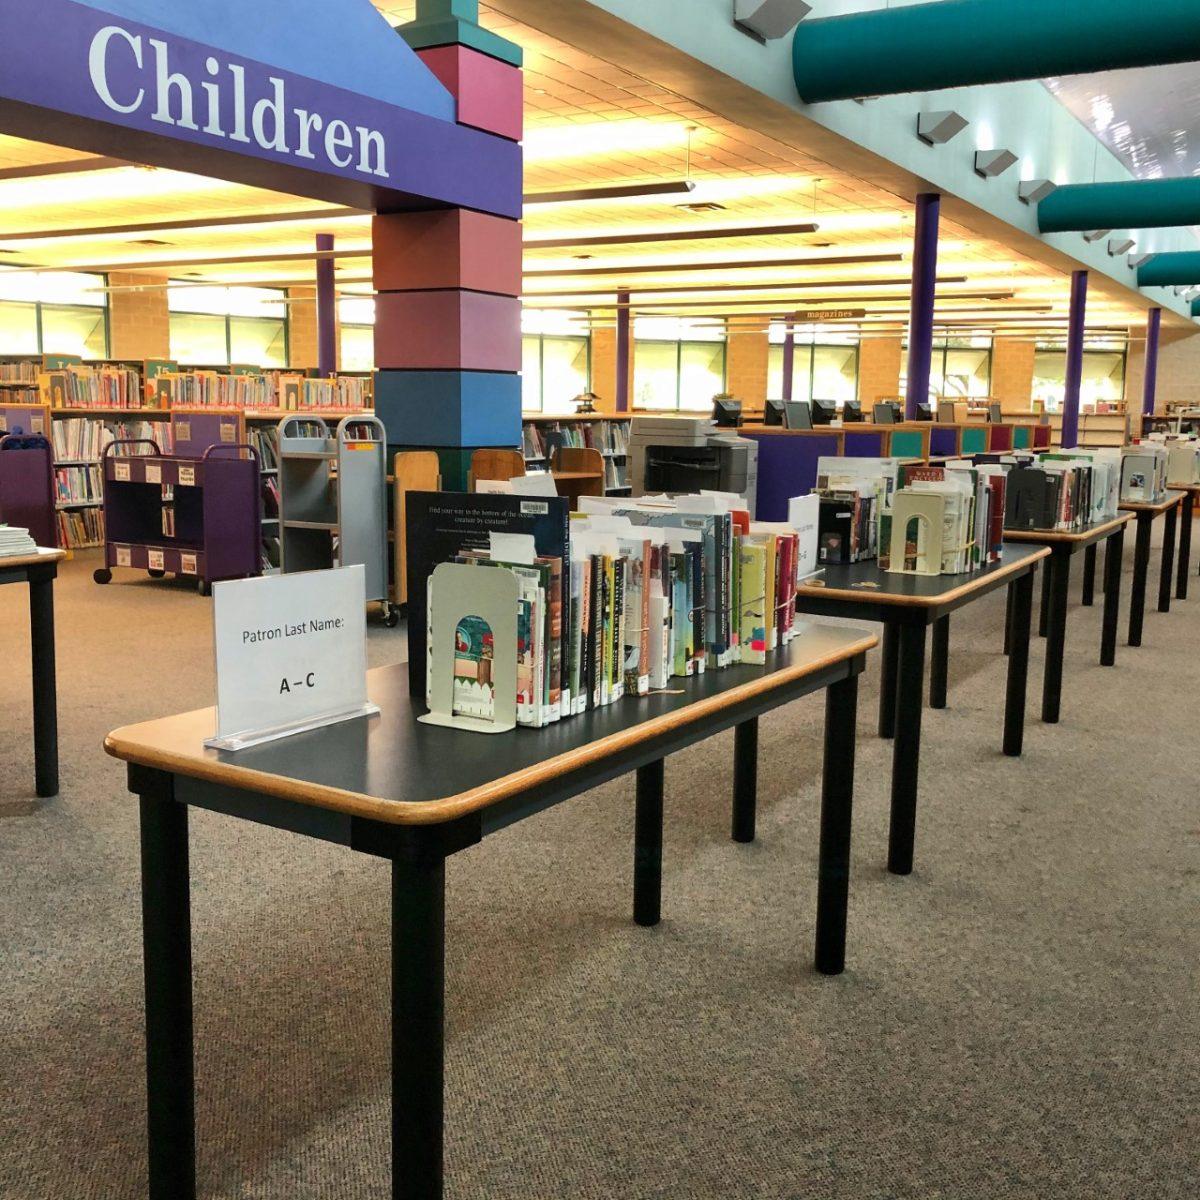 Books lined up for front porch pick-up at the San Marcos Public Library. The library’s front porch pickup service is open 11 a.m.-1 p.m. and 4-6 p.m., Monday-Saturday, as well as Sunday from 4-6 p.m. (Photo courtesy of San Marcos Public Library)